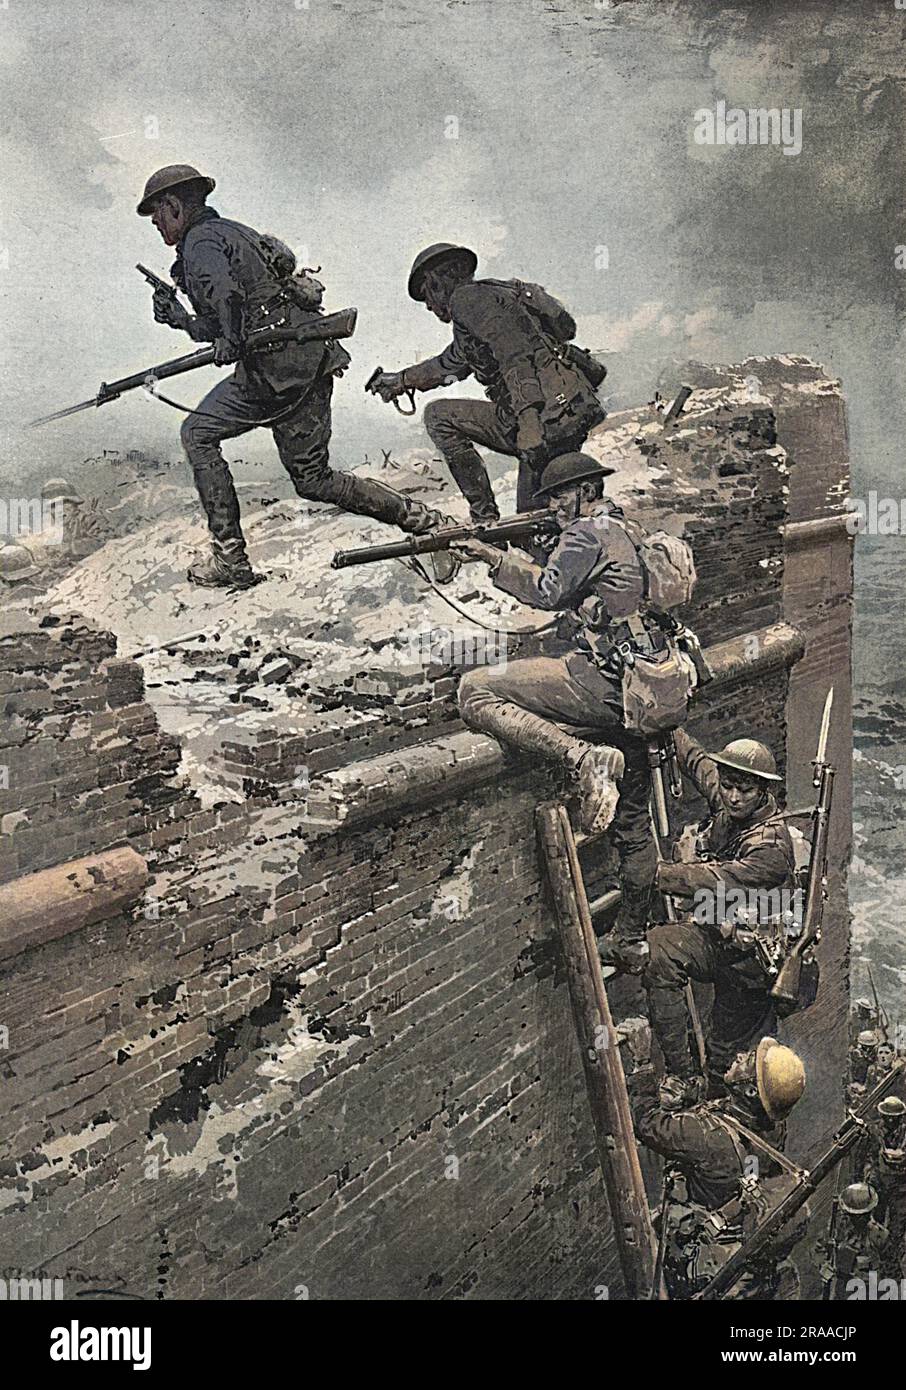 New Zealand troops scale the walls of the French town of Le Quesnoy. In their last major action of the war, the New Zealanders successfully took the town that had been occupied by German forces since August 1914     Date: 04-Nov-18 Stock Photo